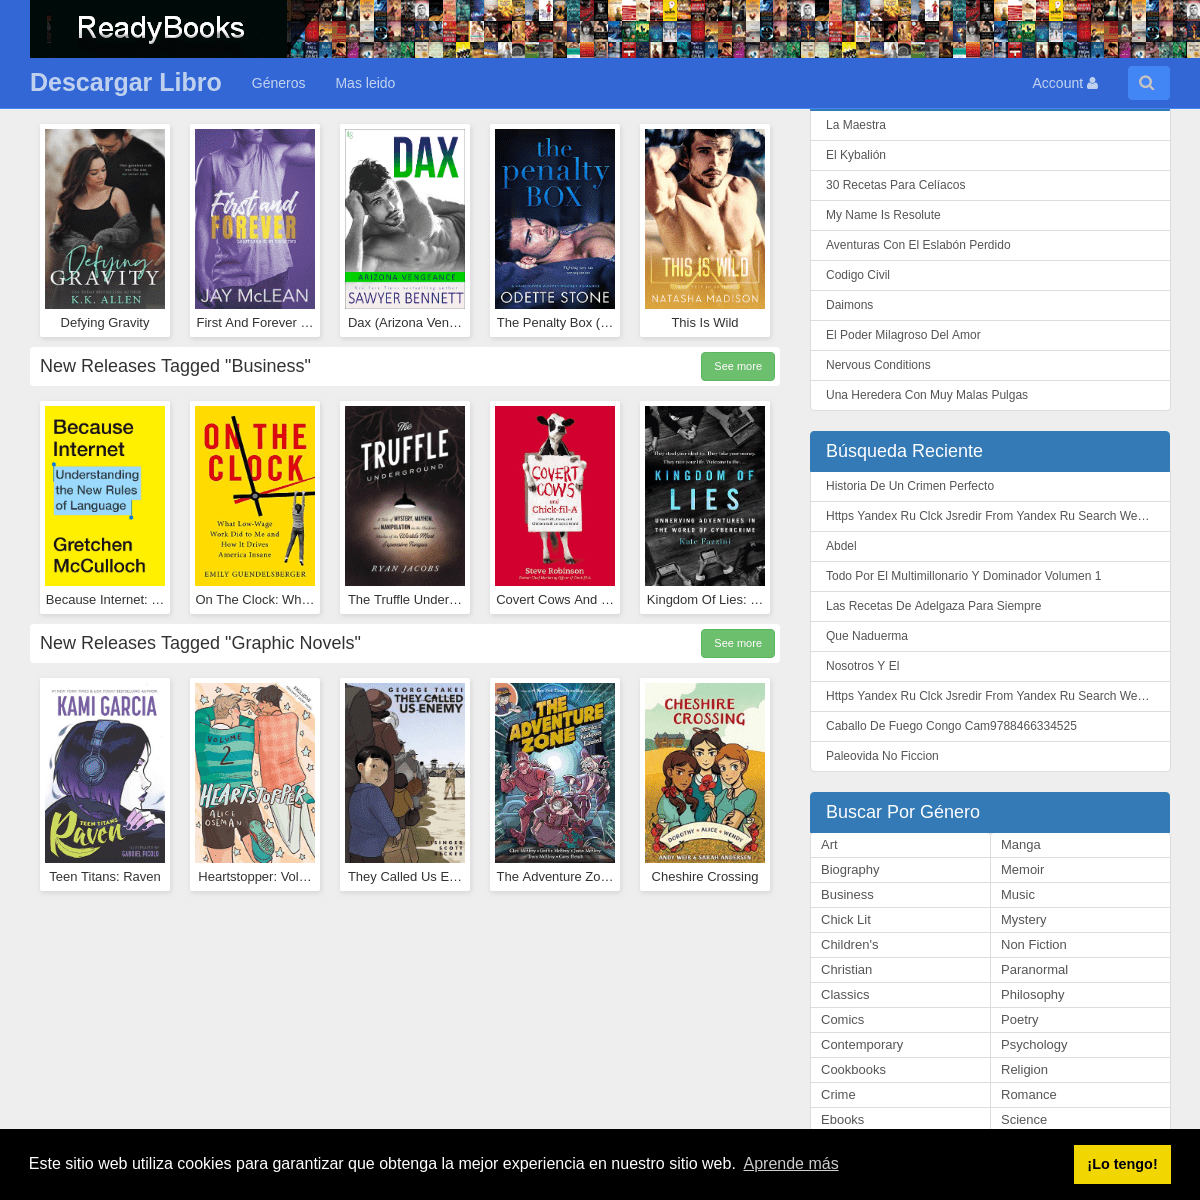 A complete backup of readybooks.org